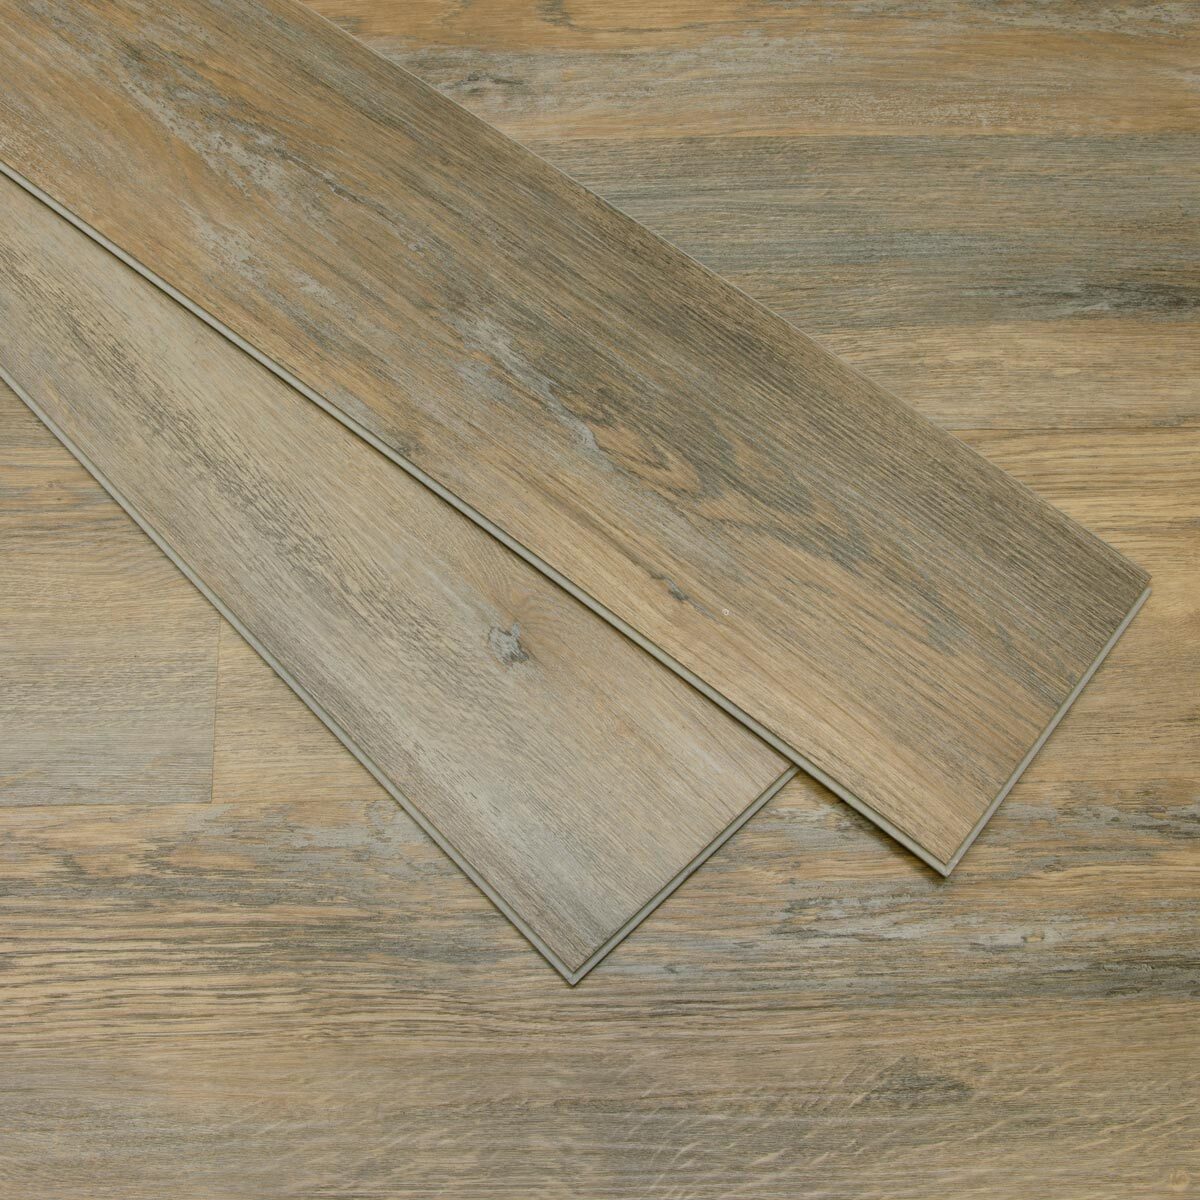 Close up image of flooring with two loose planks